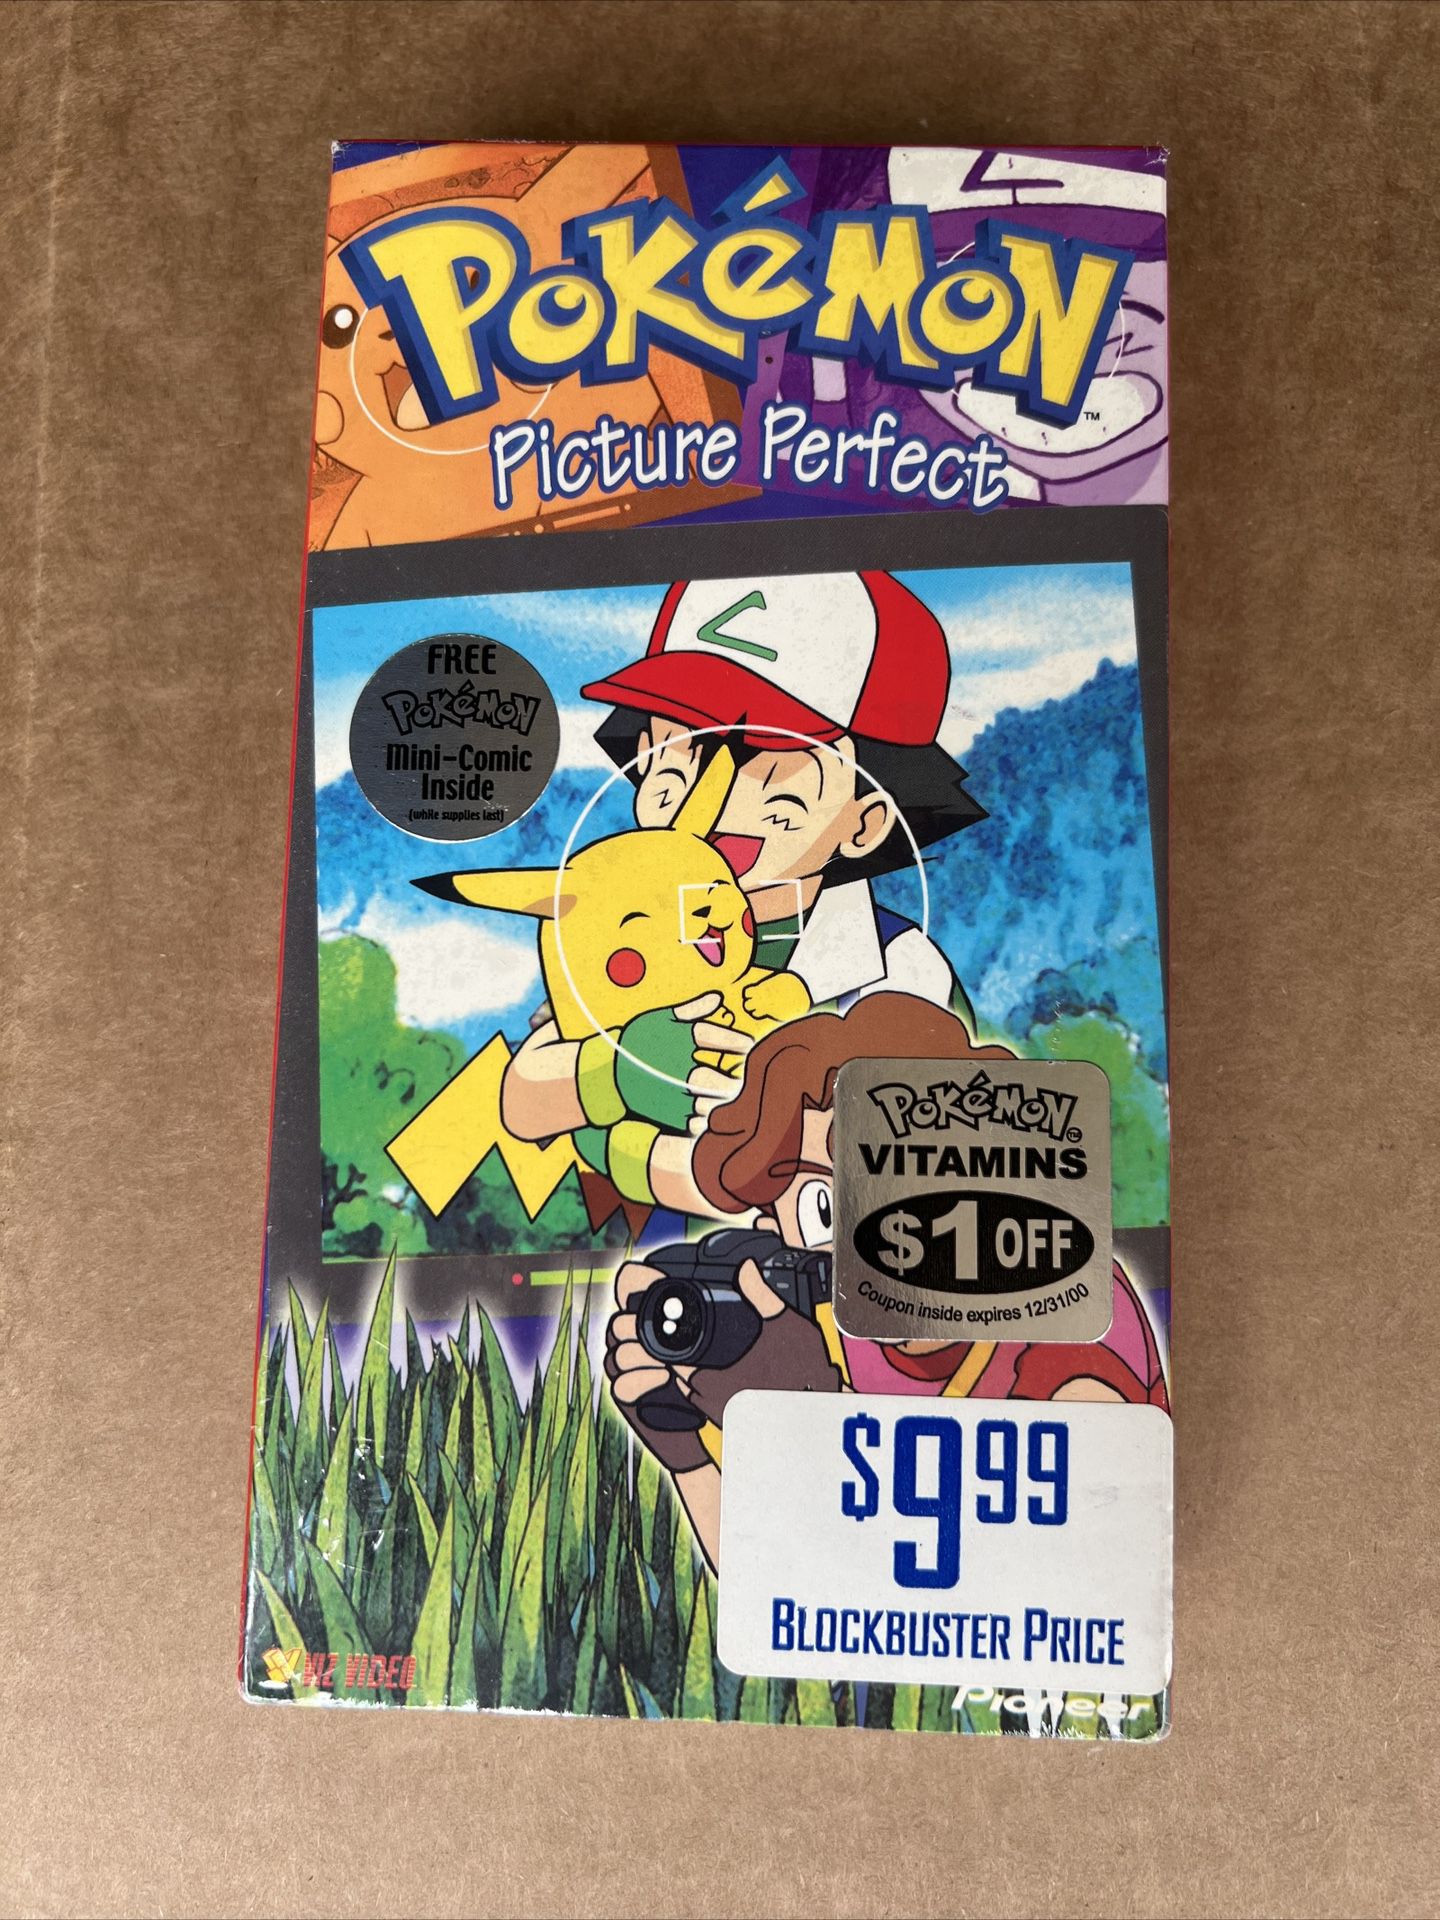 SEALED 1998 Pokemon Picture Perfect VHS With Mini Comic 